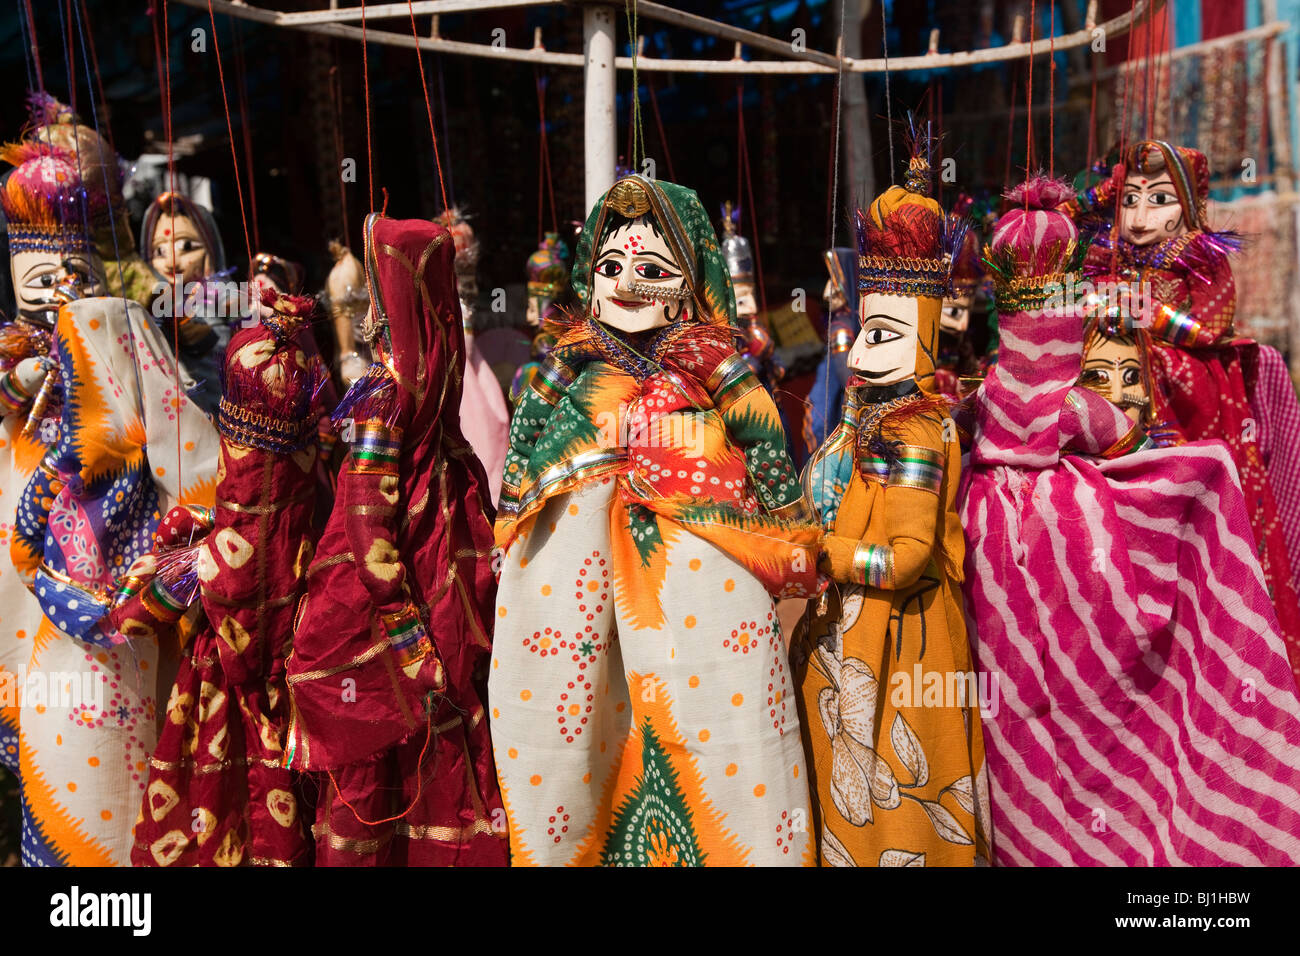 India, Kerala, Kochi, Fort Cochin, display of inexpensive souvenir puppets for sale Stock Photo